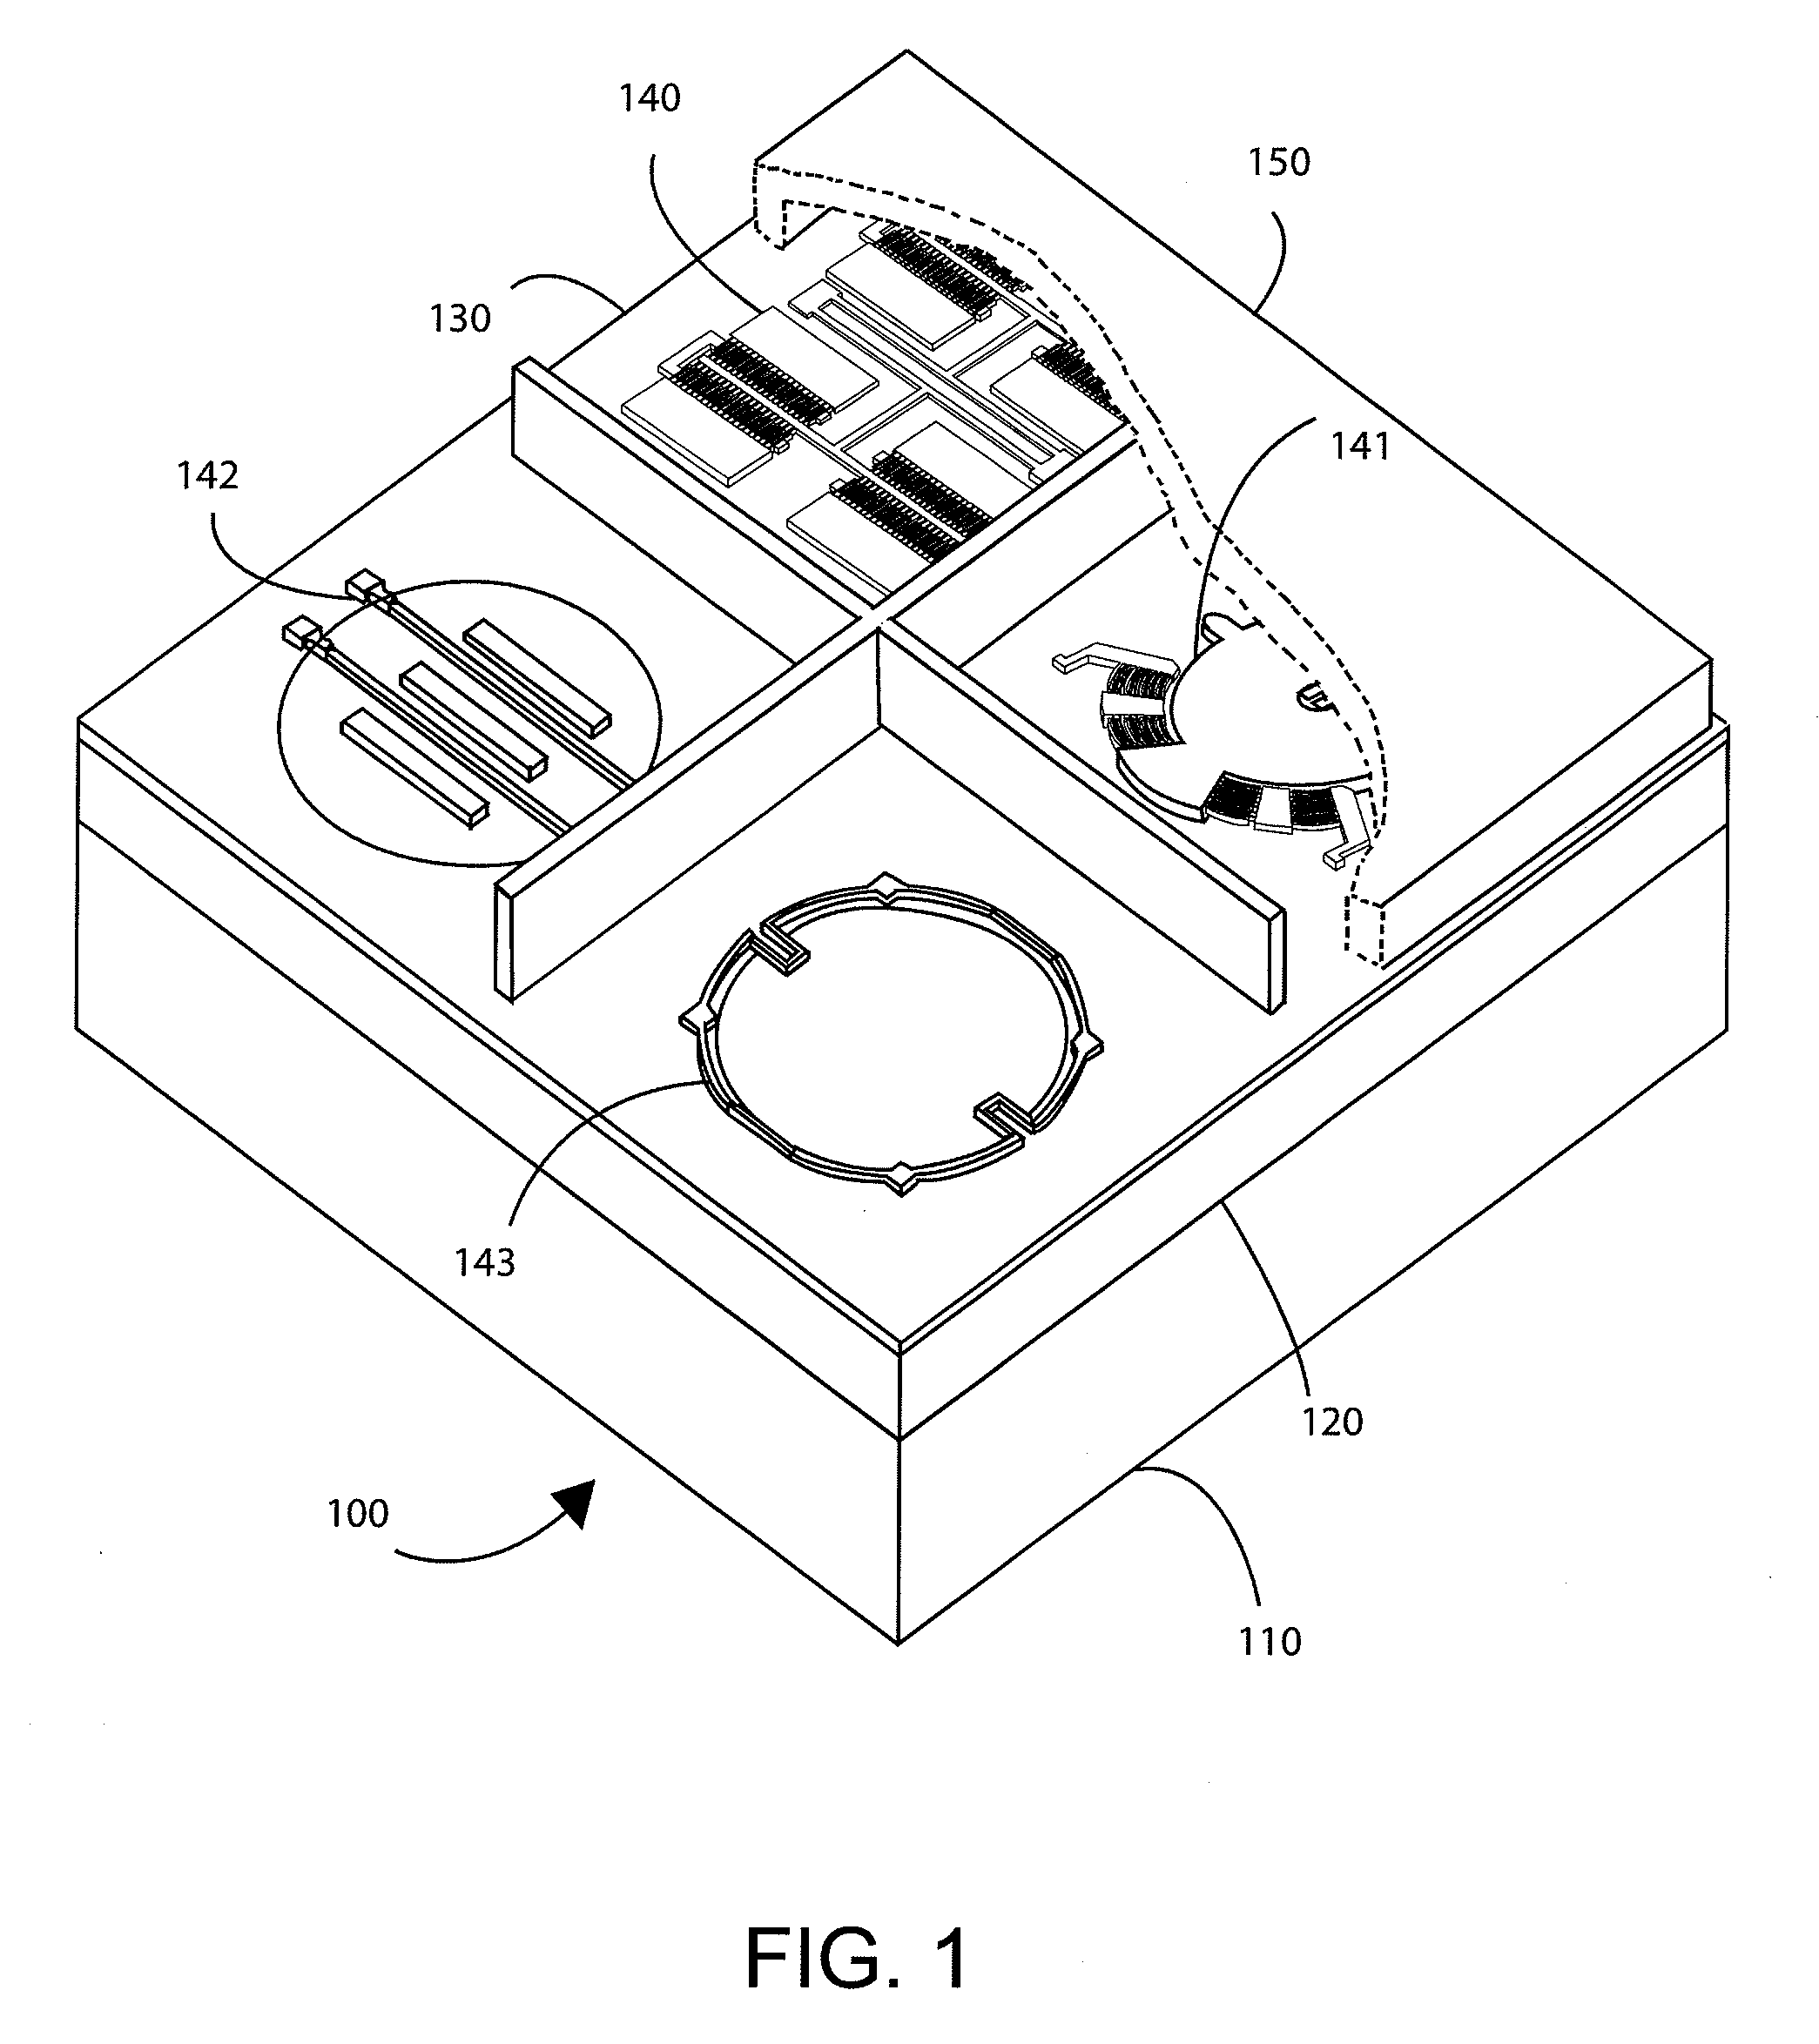 Integrated system on chip using multiple MEMS and CMOS devices